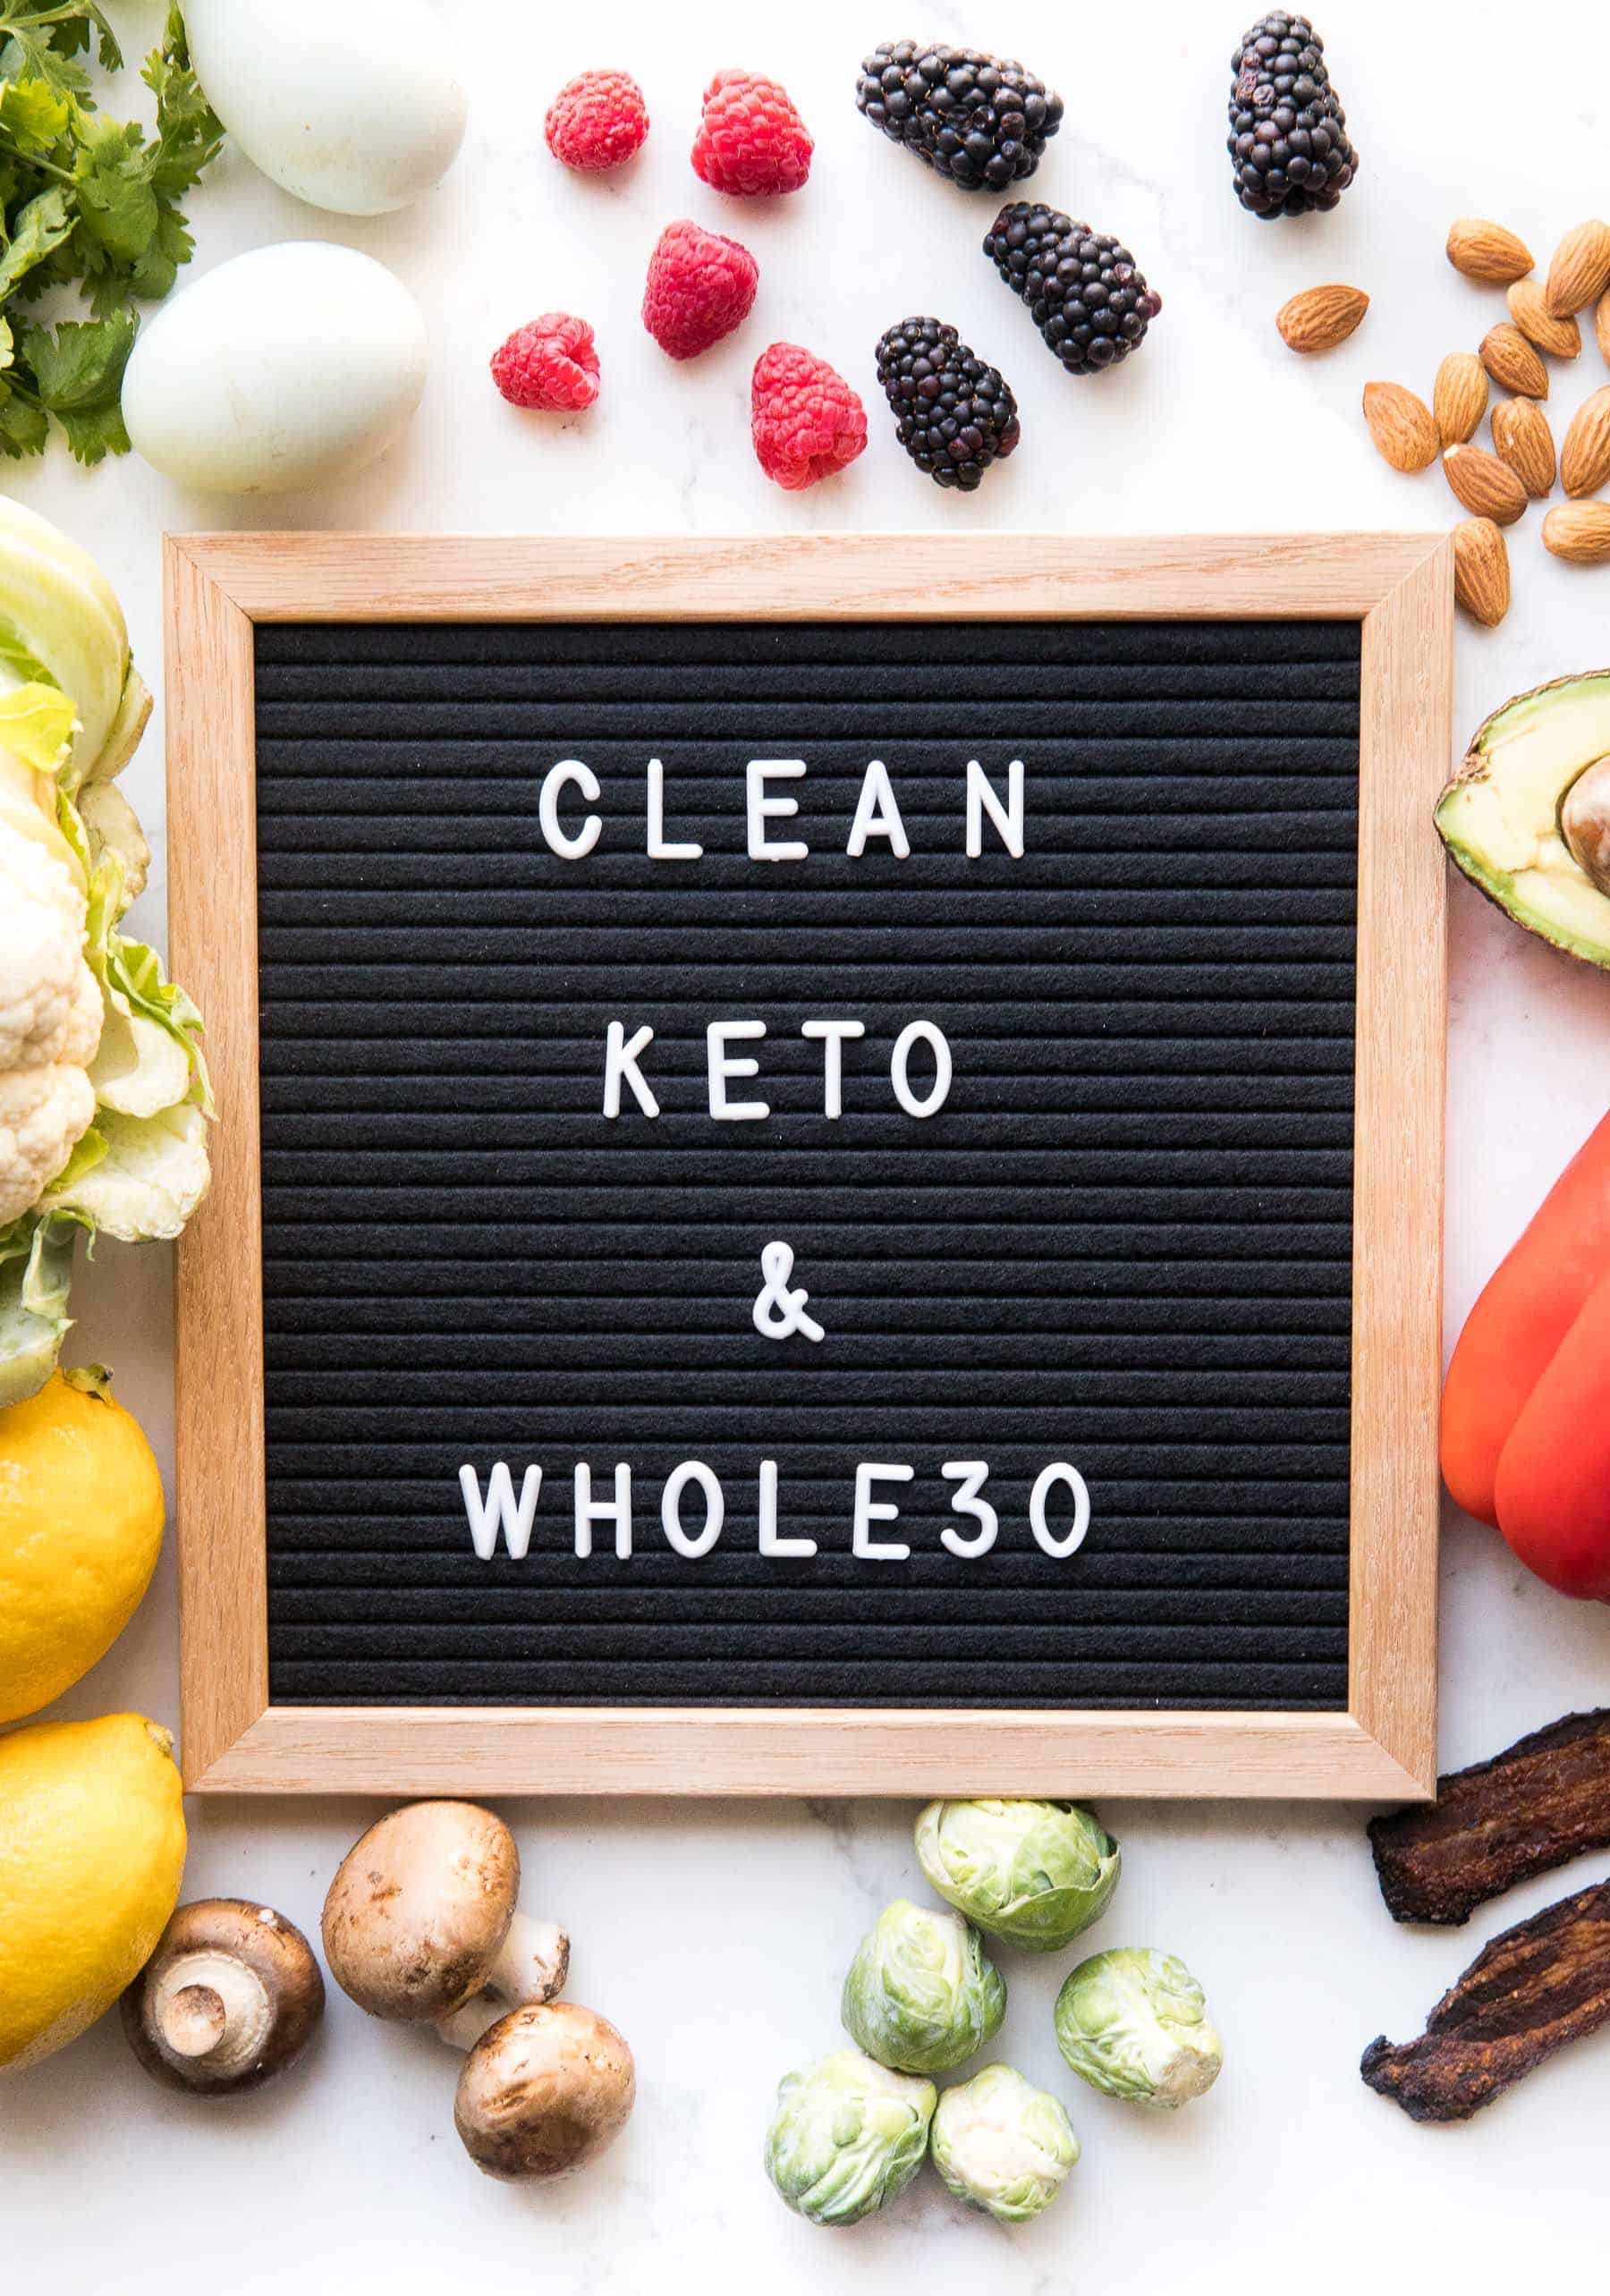 The Clean Keto + Whole30 Foods I Eat - Tastes Lovely